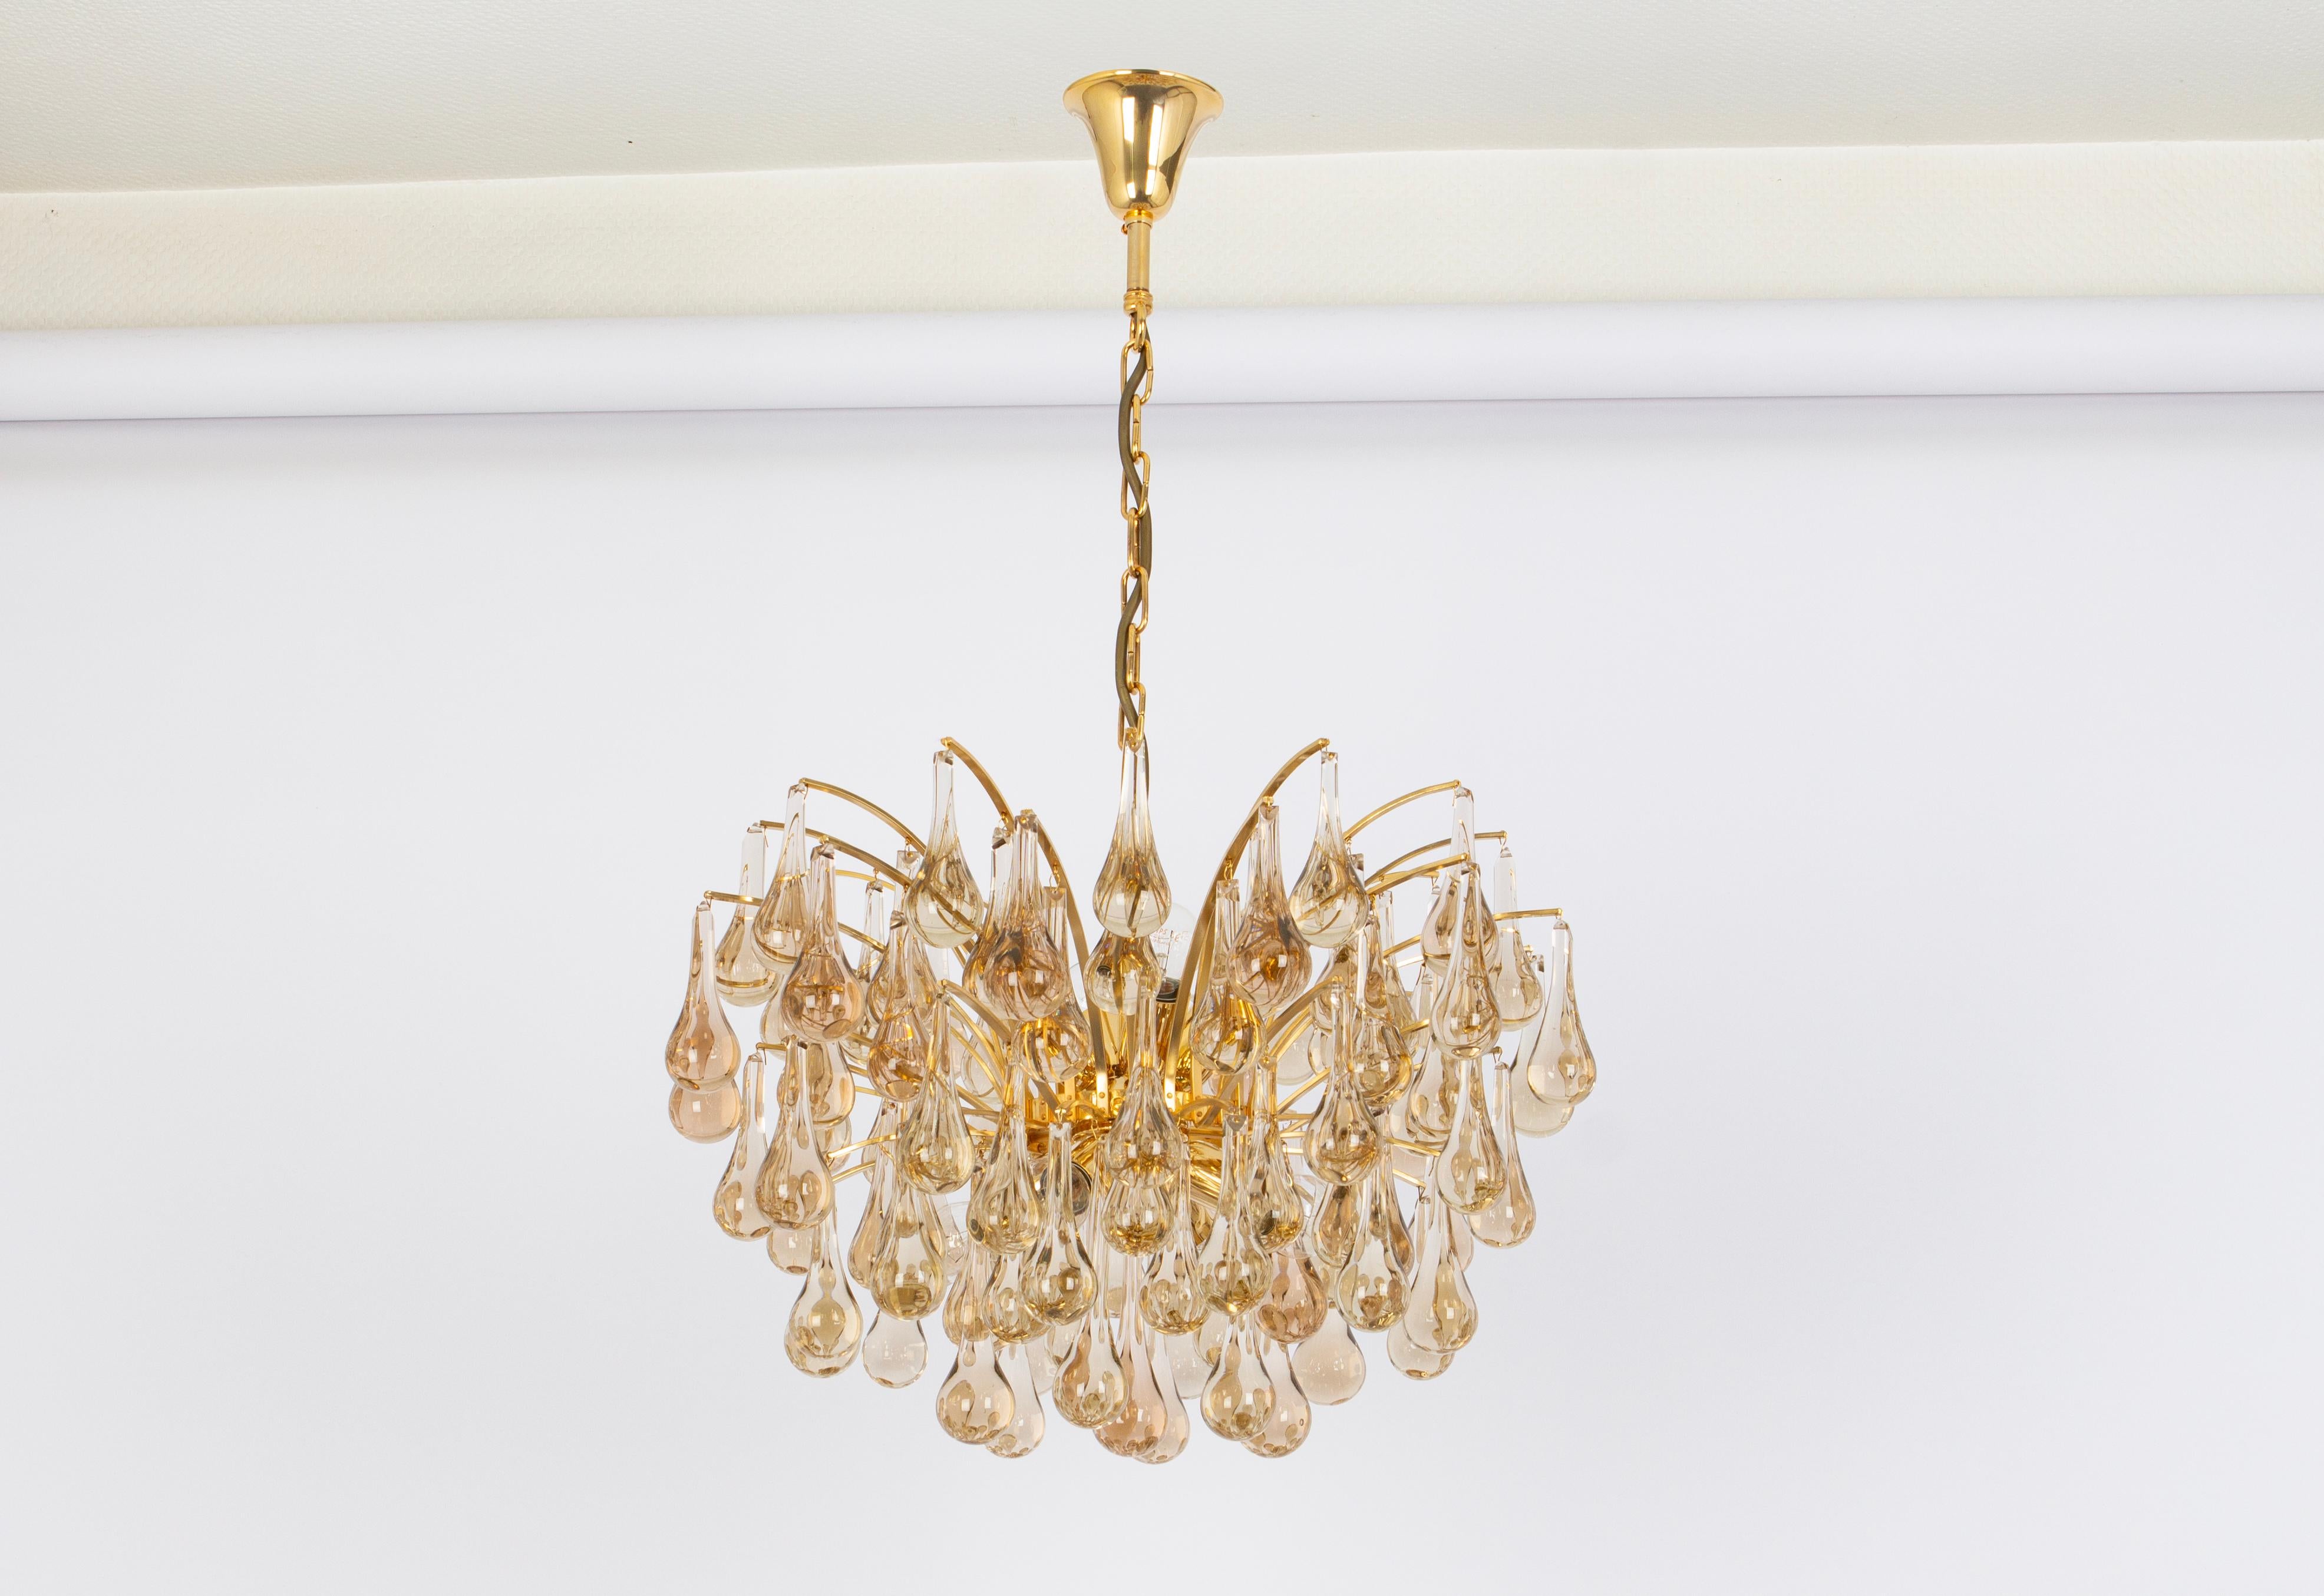 1 of 2 Stunning chandeliers by Christoph Palme, Germany, manufactured in the 1970s. It’s composed of Murano teardrop glass pieces on a gilded brass frame.

High quality and in very good condition. Cleaned, well-wired, and ready to use. 

The fixture